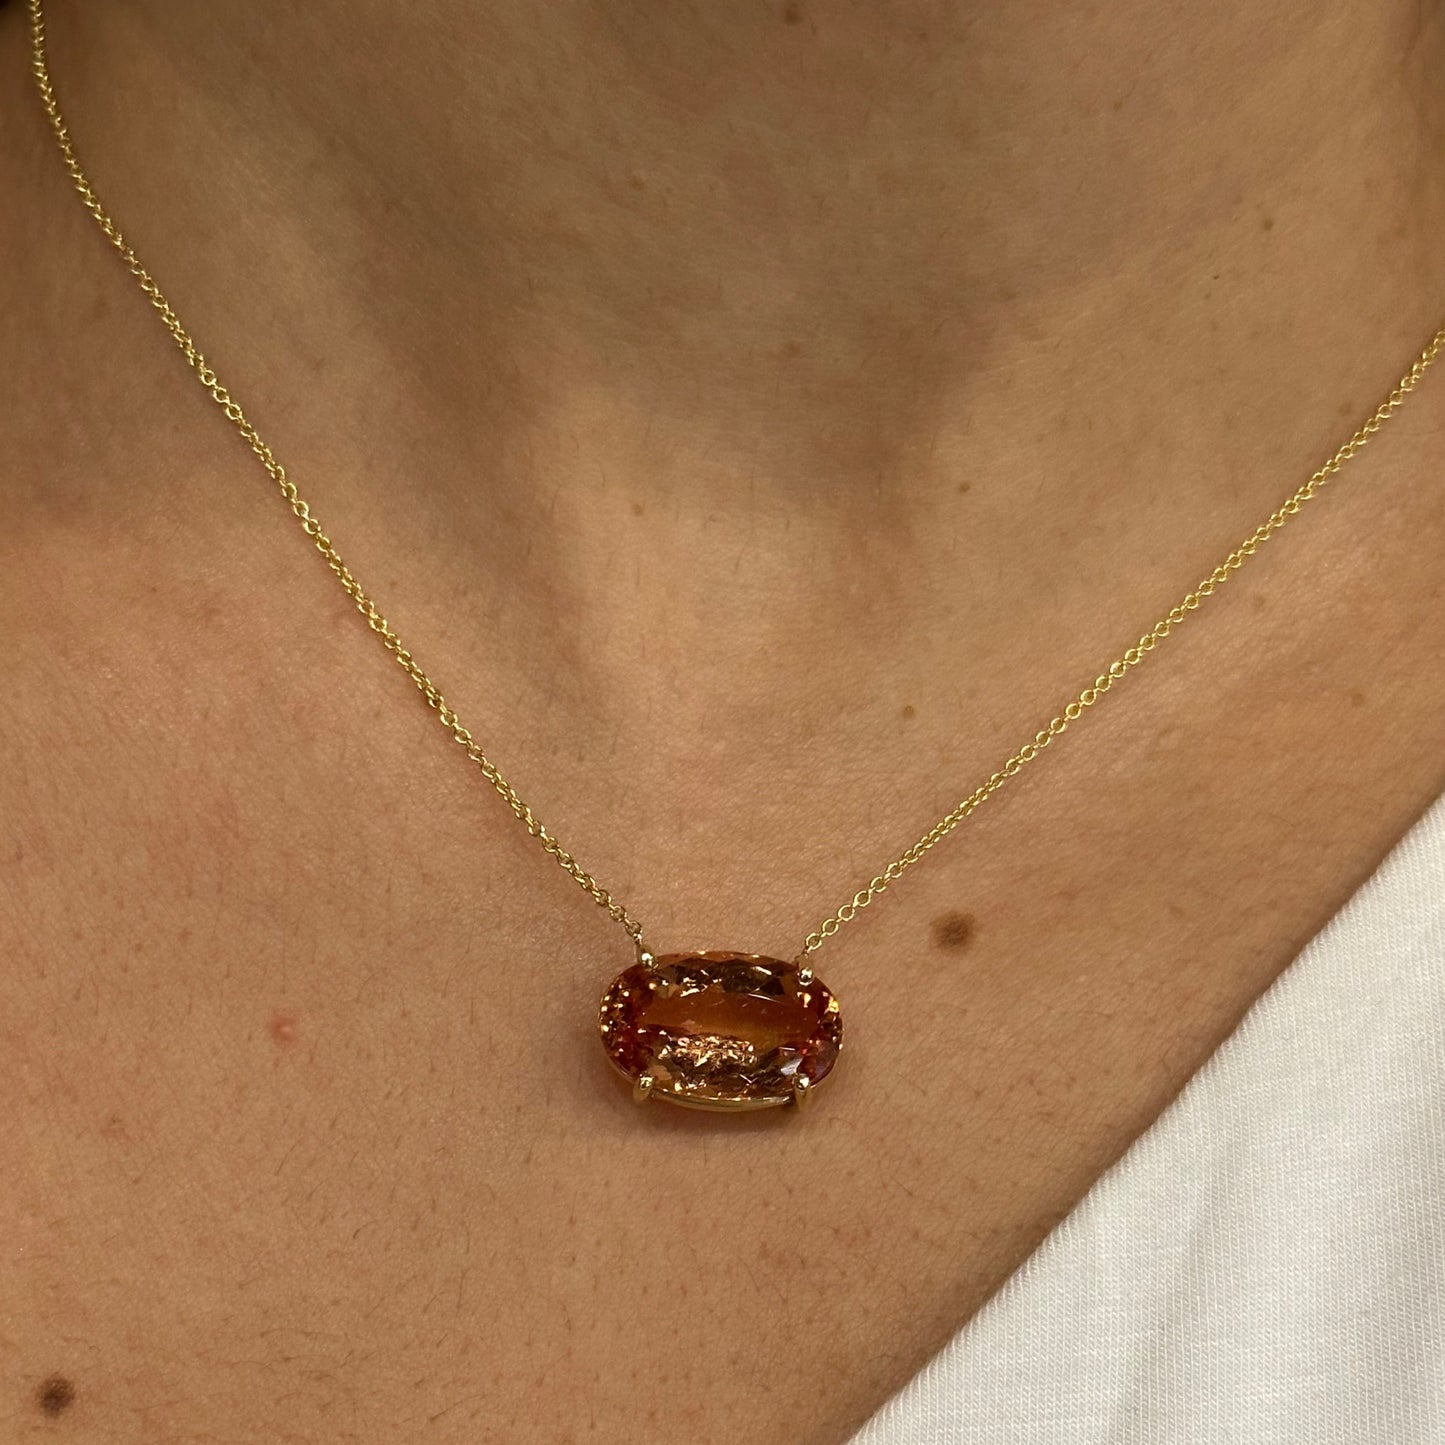 10ct Imperial Topaz Solitaire Necklace